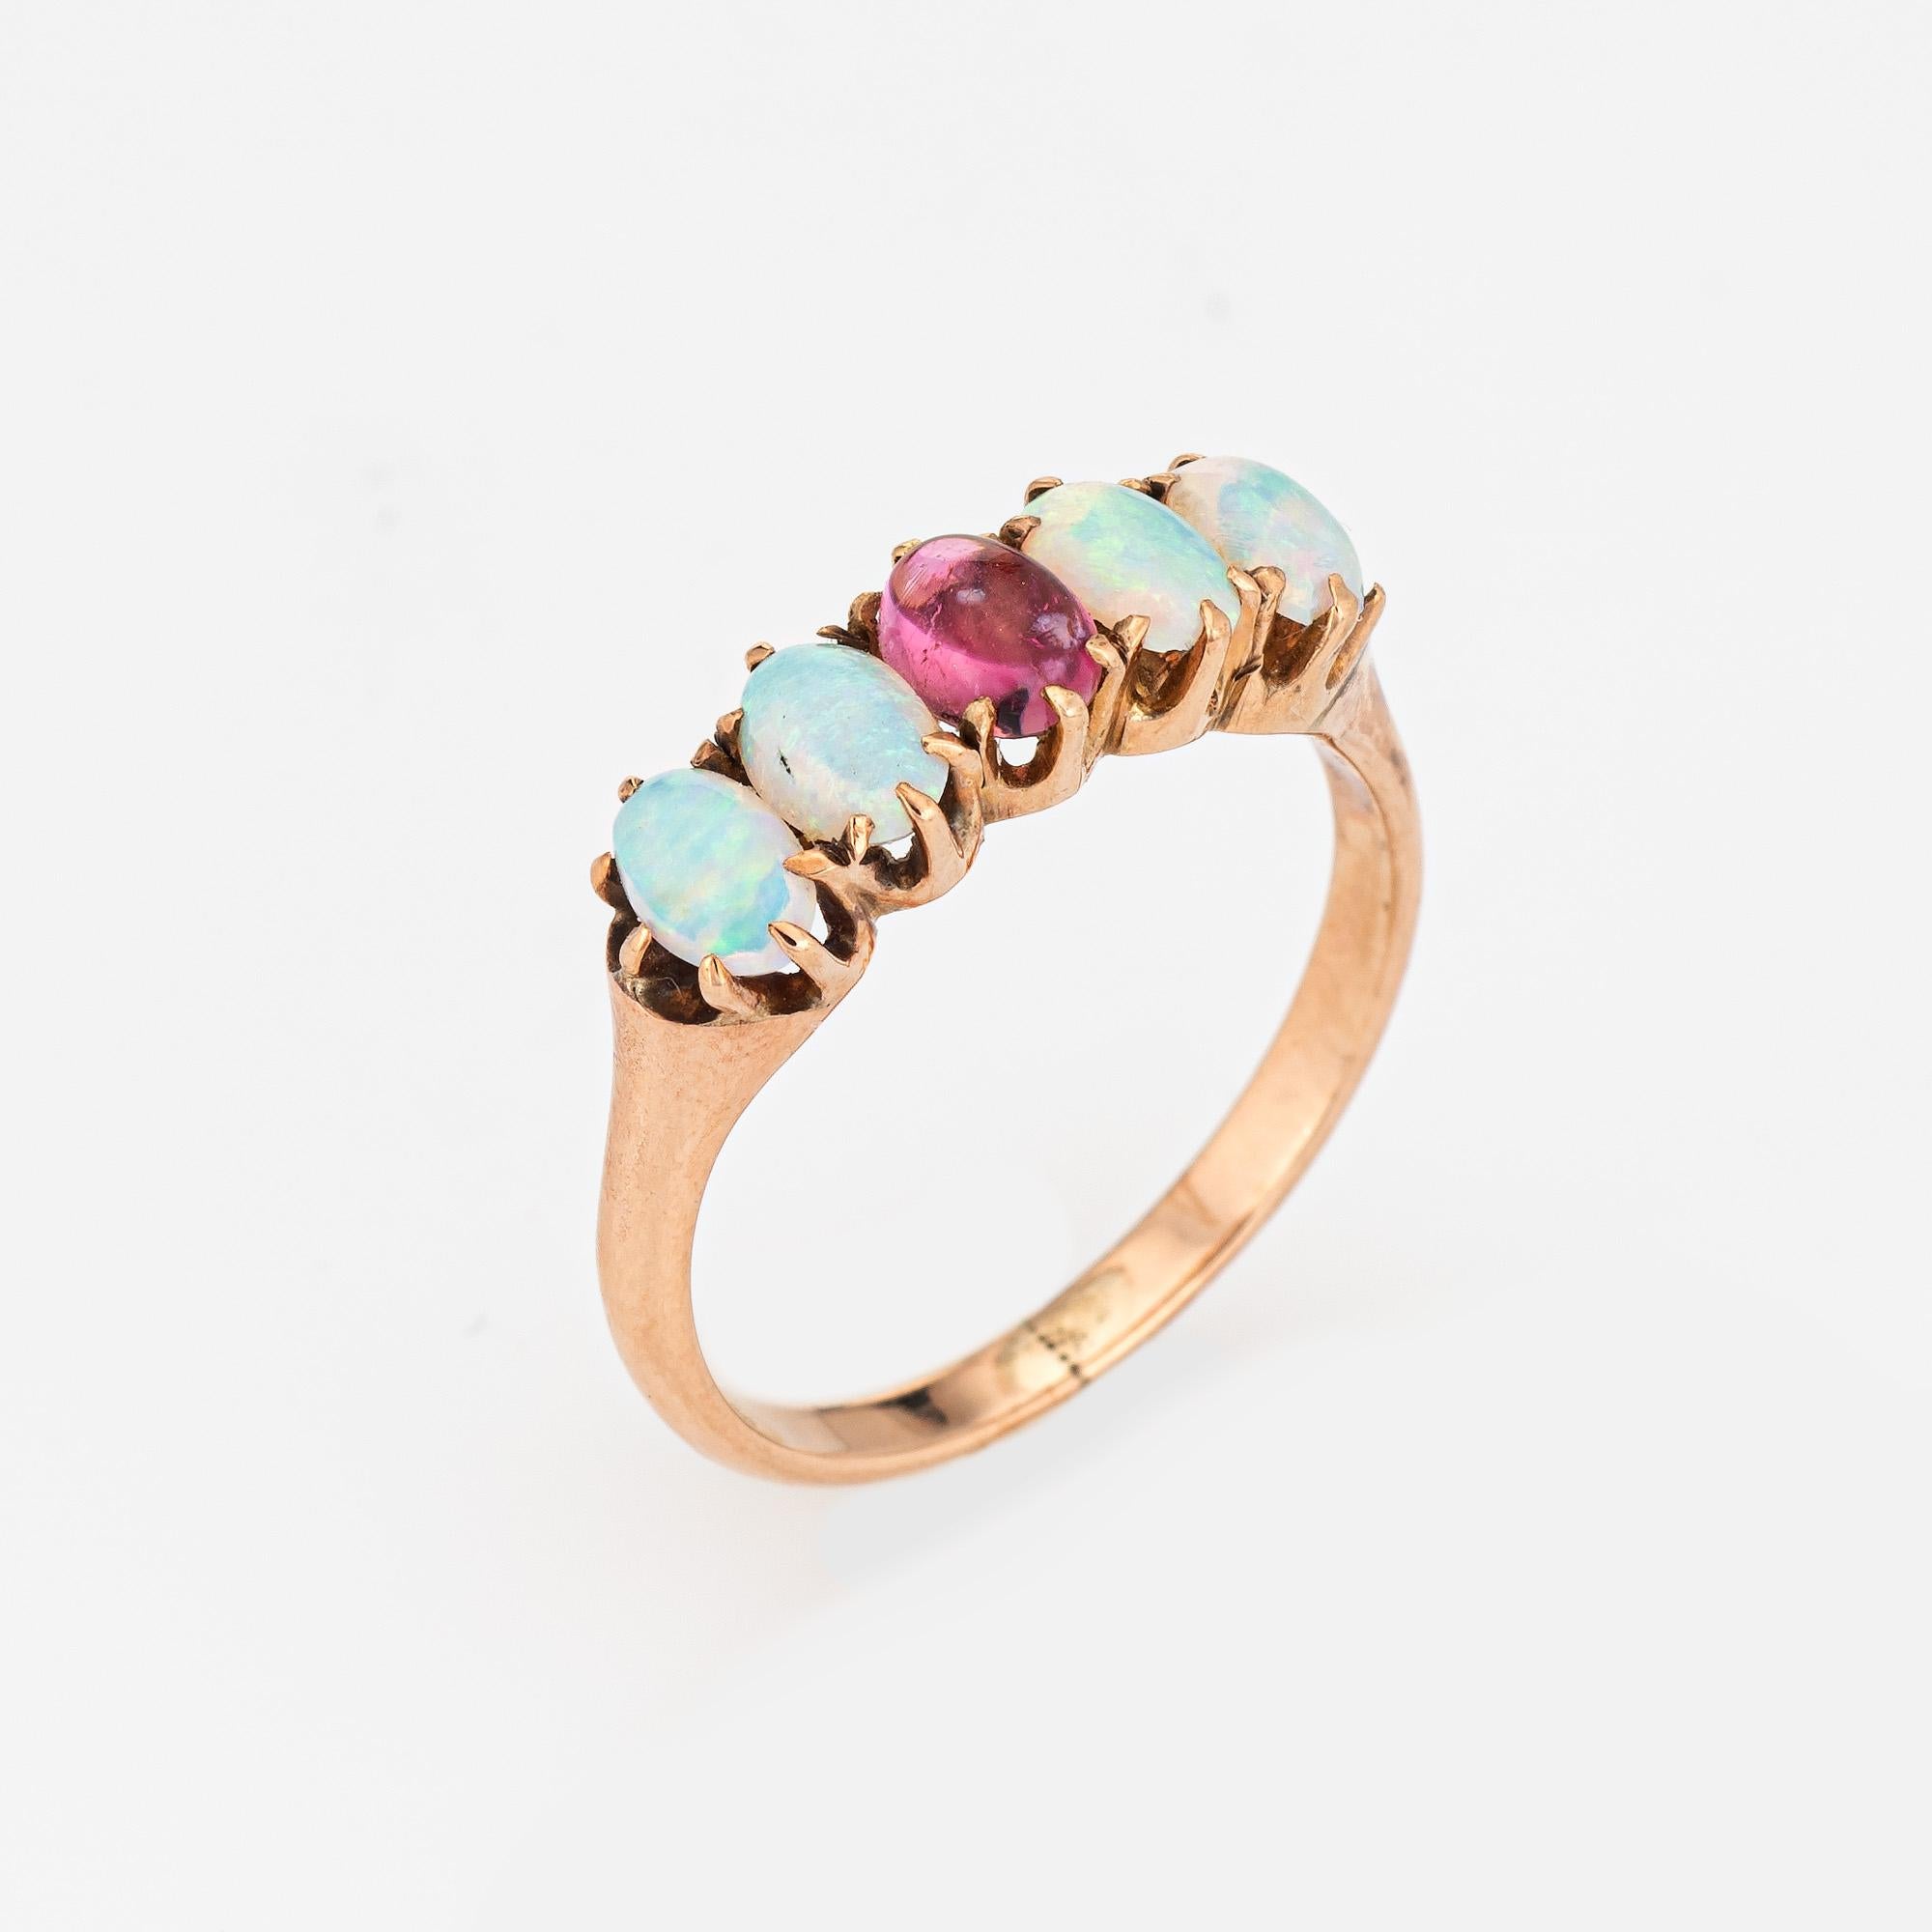 Elegant antique Victorian ring (circa 1880s to 1900s), crafted in 10 karat rose gold. 
Four opals are estimated at 0.20 carats each (0.80 carats total estimated weight), accented with one estimated 0.20 carat cabochon cut pink tourmaline. The pink